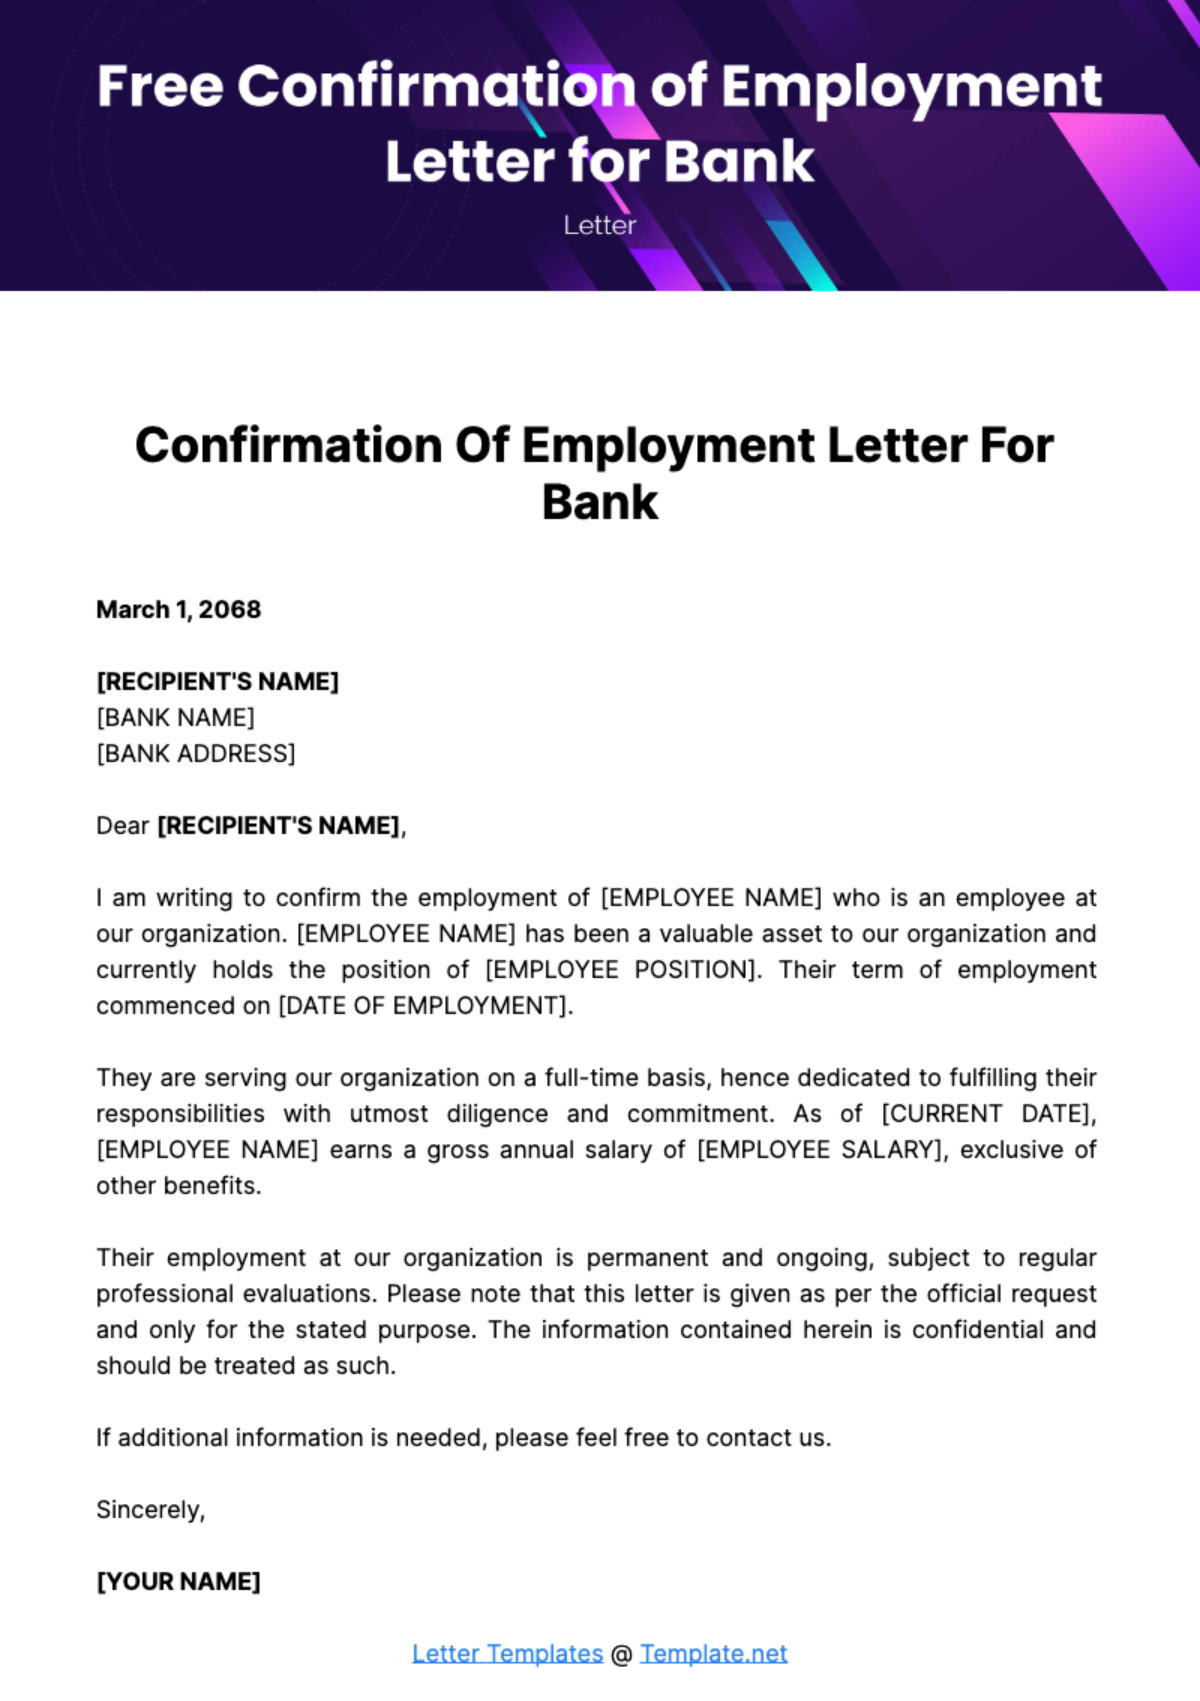 Free Confirmation of Employment Letter for Bank Template